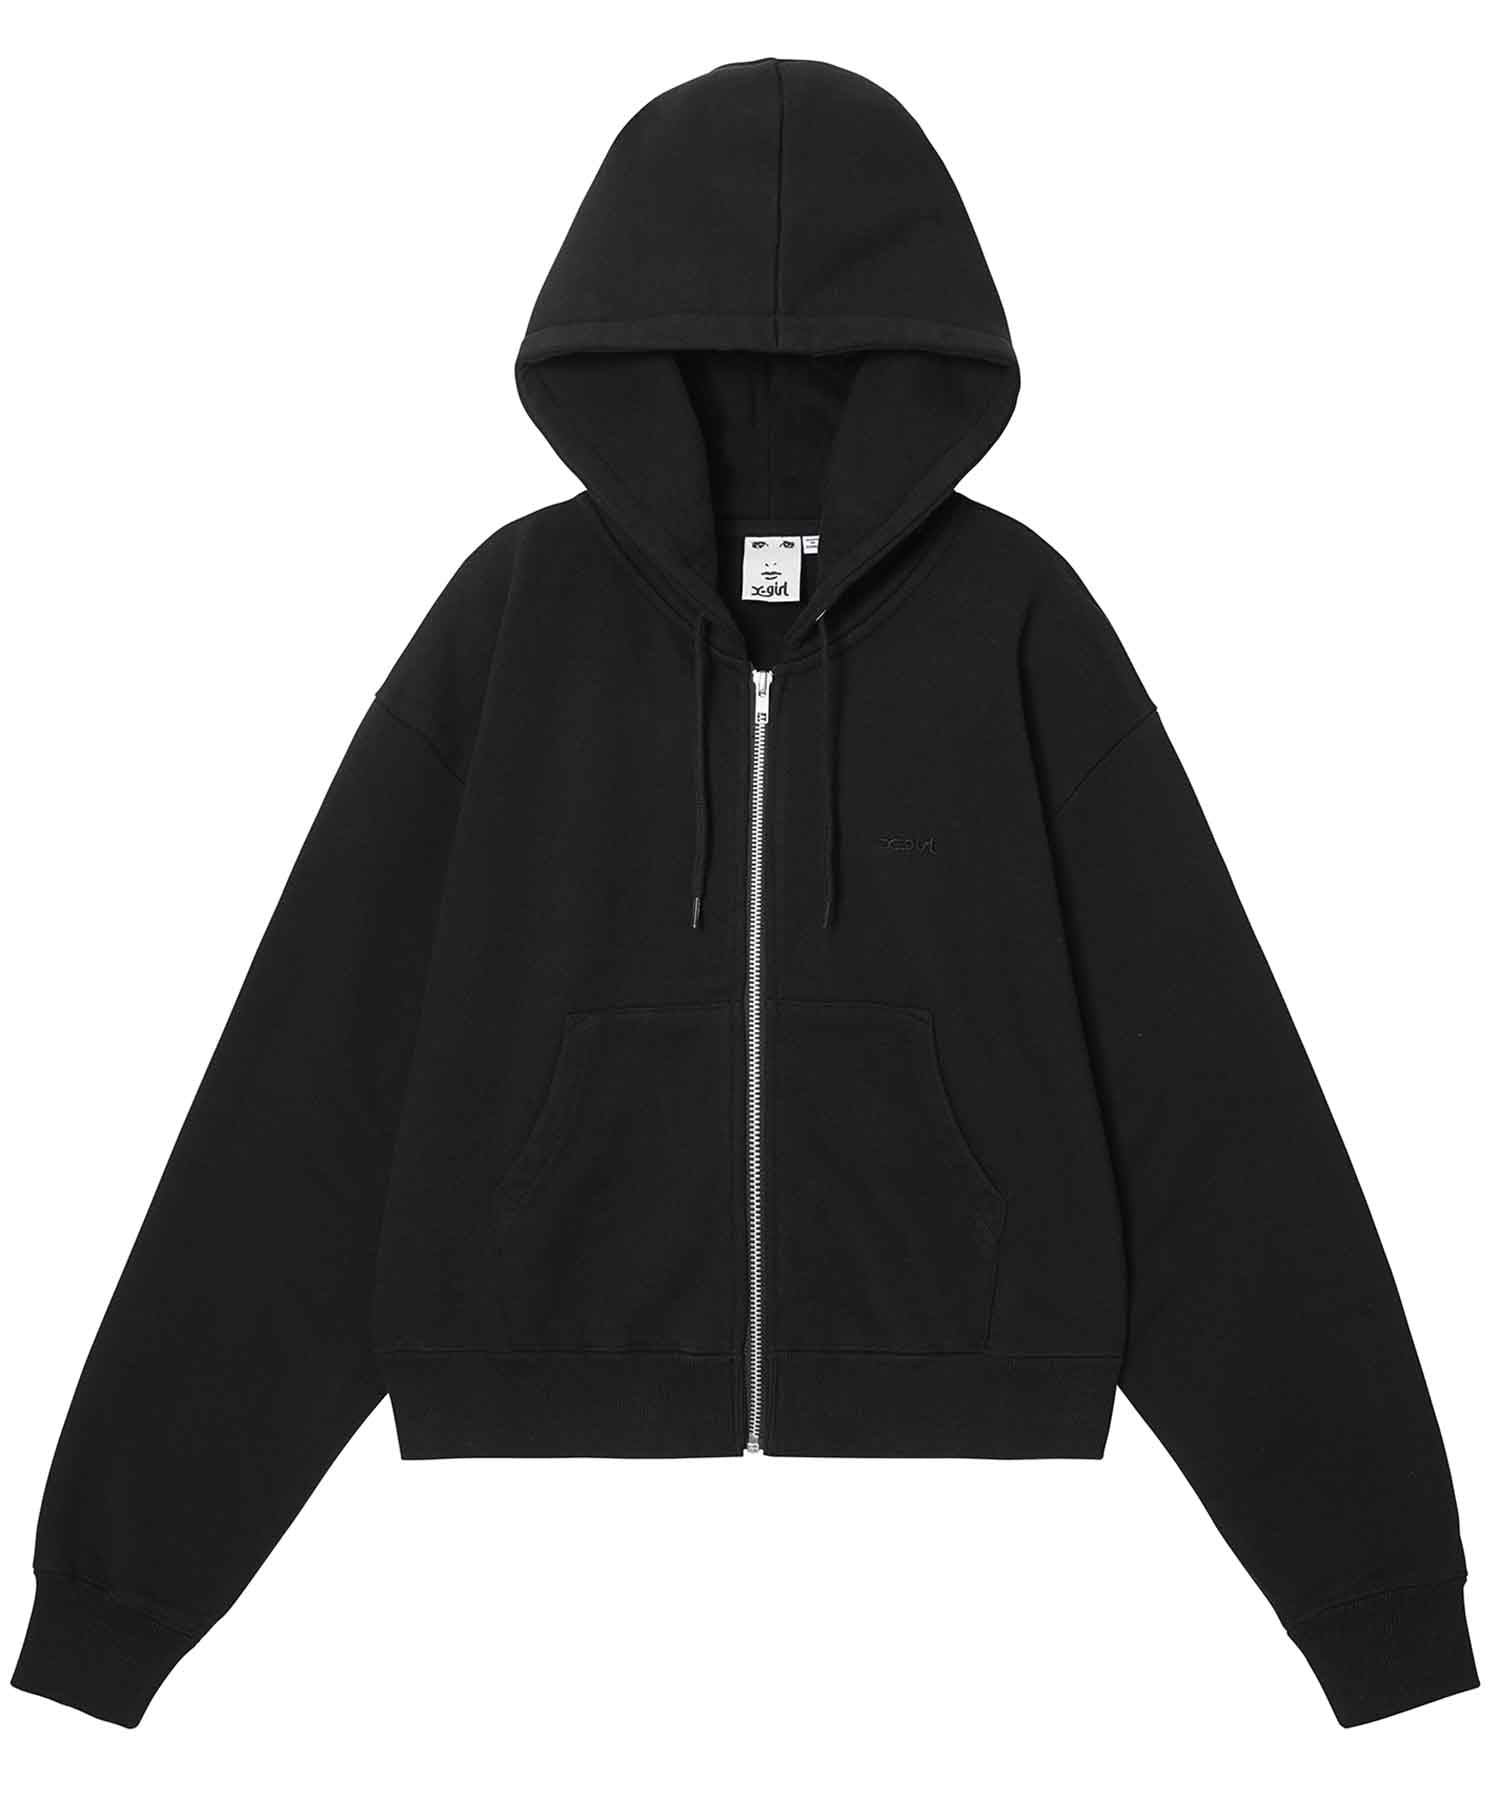 Shop the X-girl Hooded Zip Up Track Jacket - Real Girls